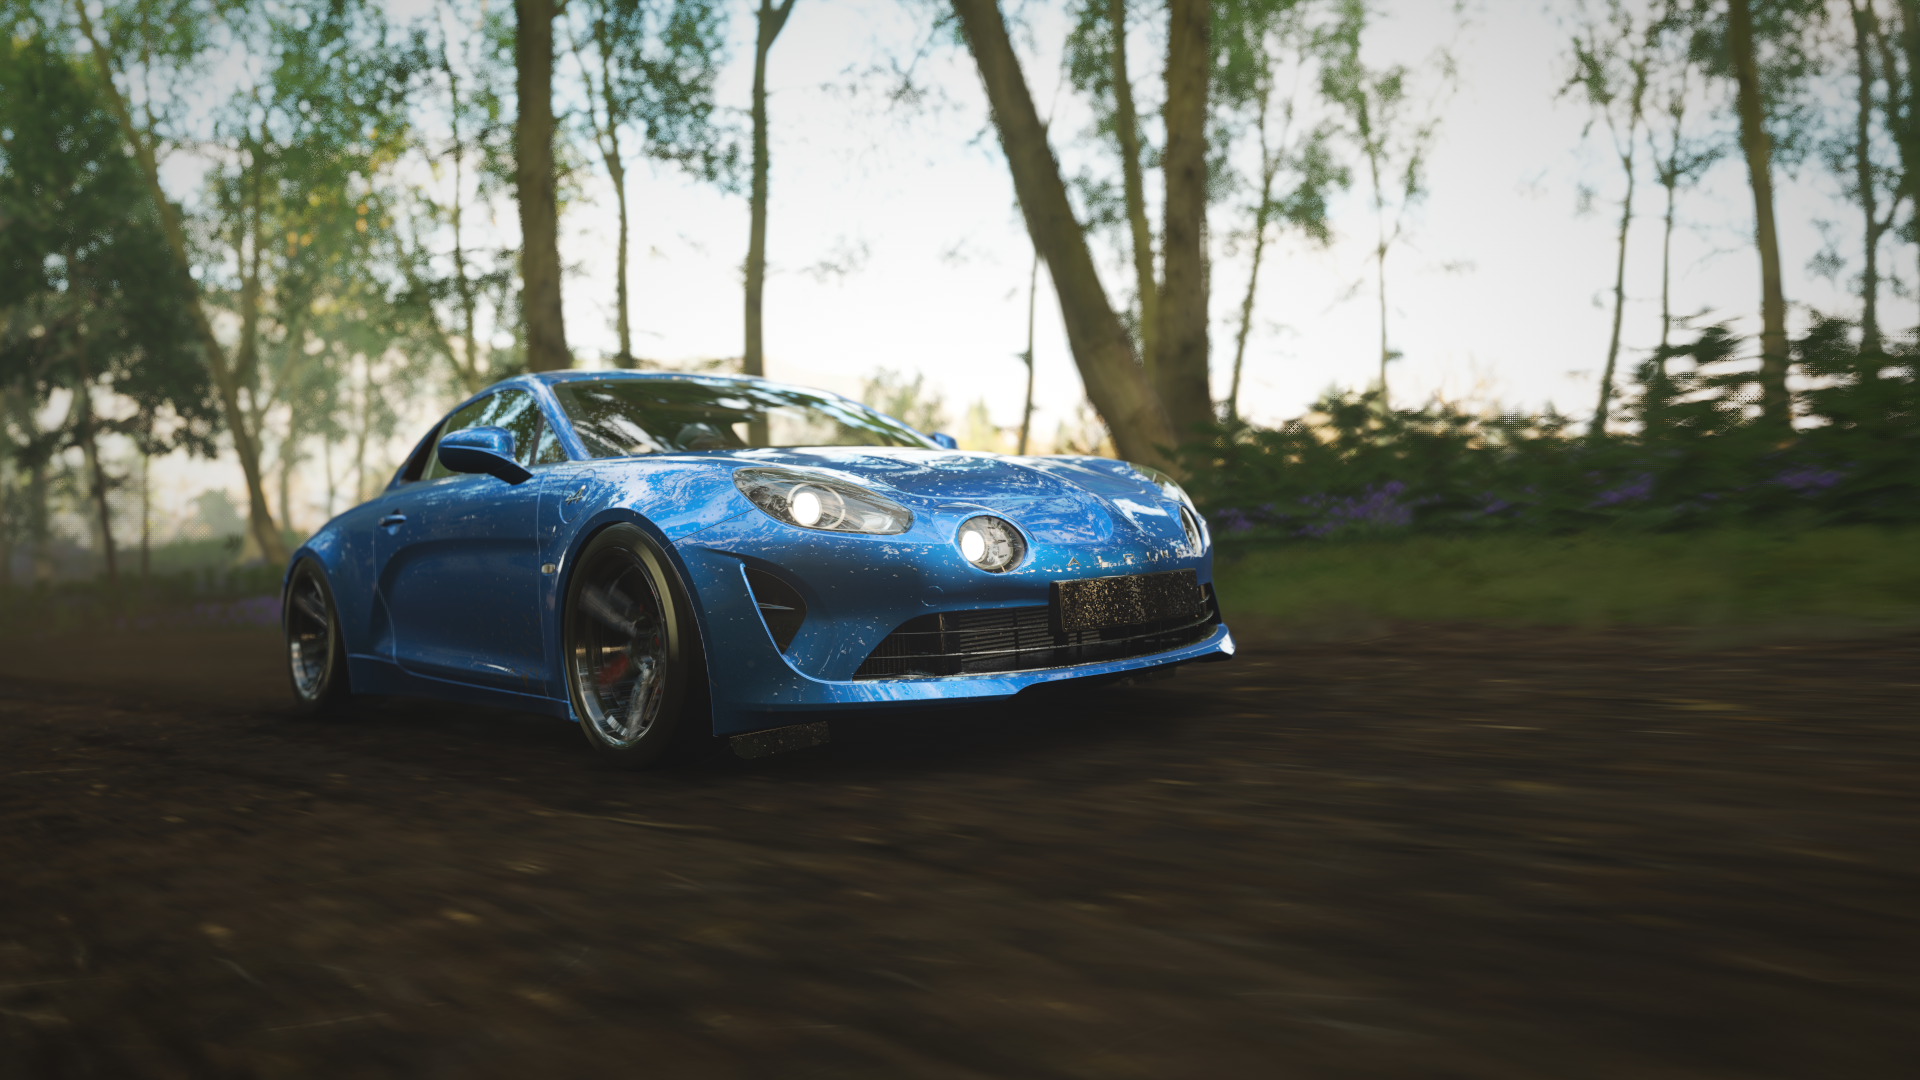 General 1920x1080 Forza Forza Horizon 4 car Renault Alpine video games Alpine A110 French Cars PlaygroundGames